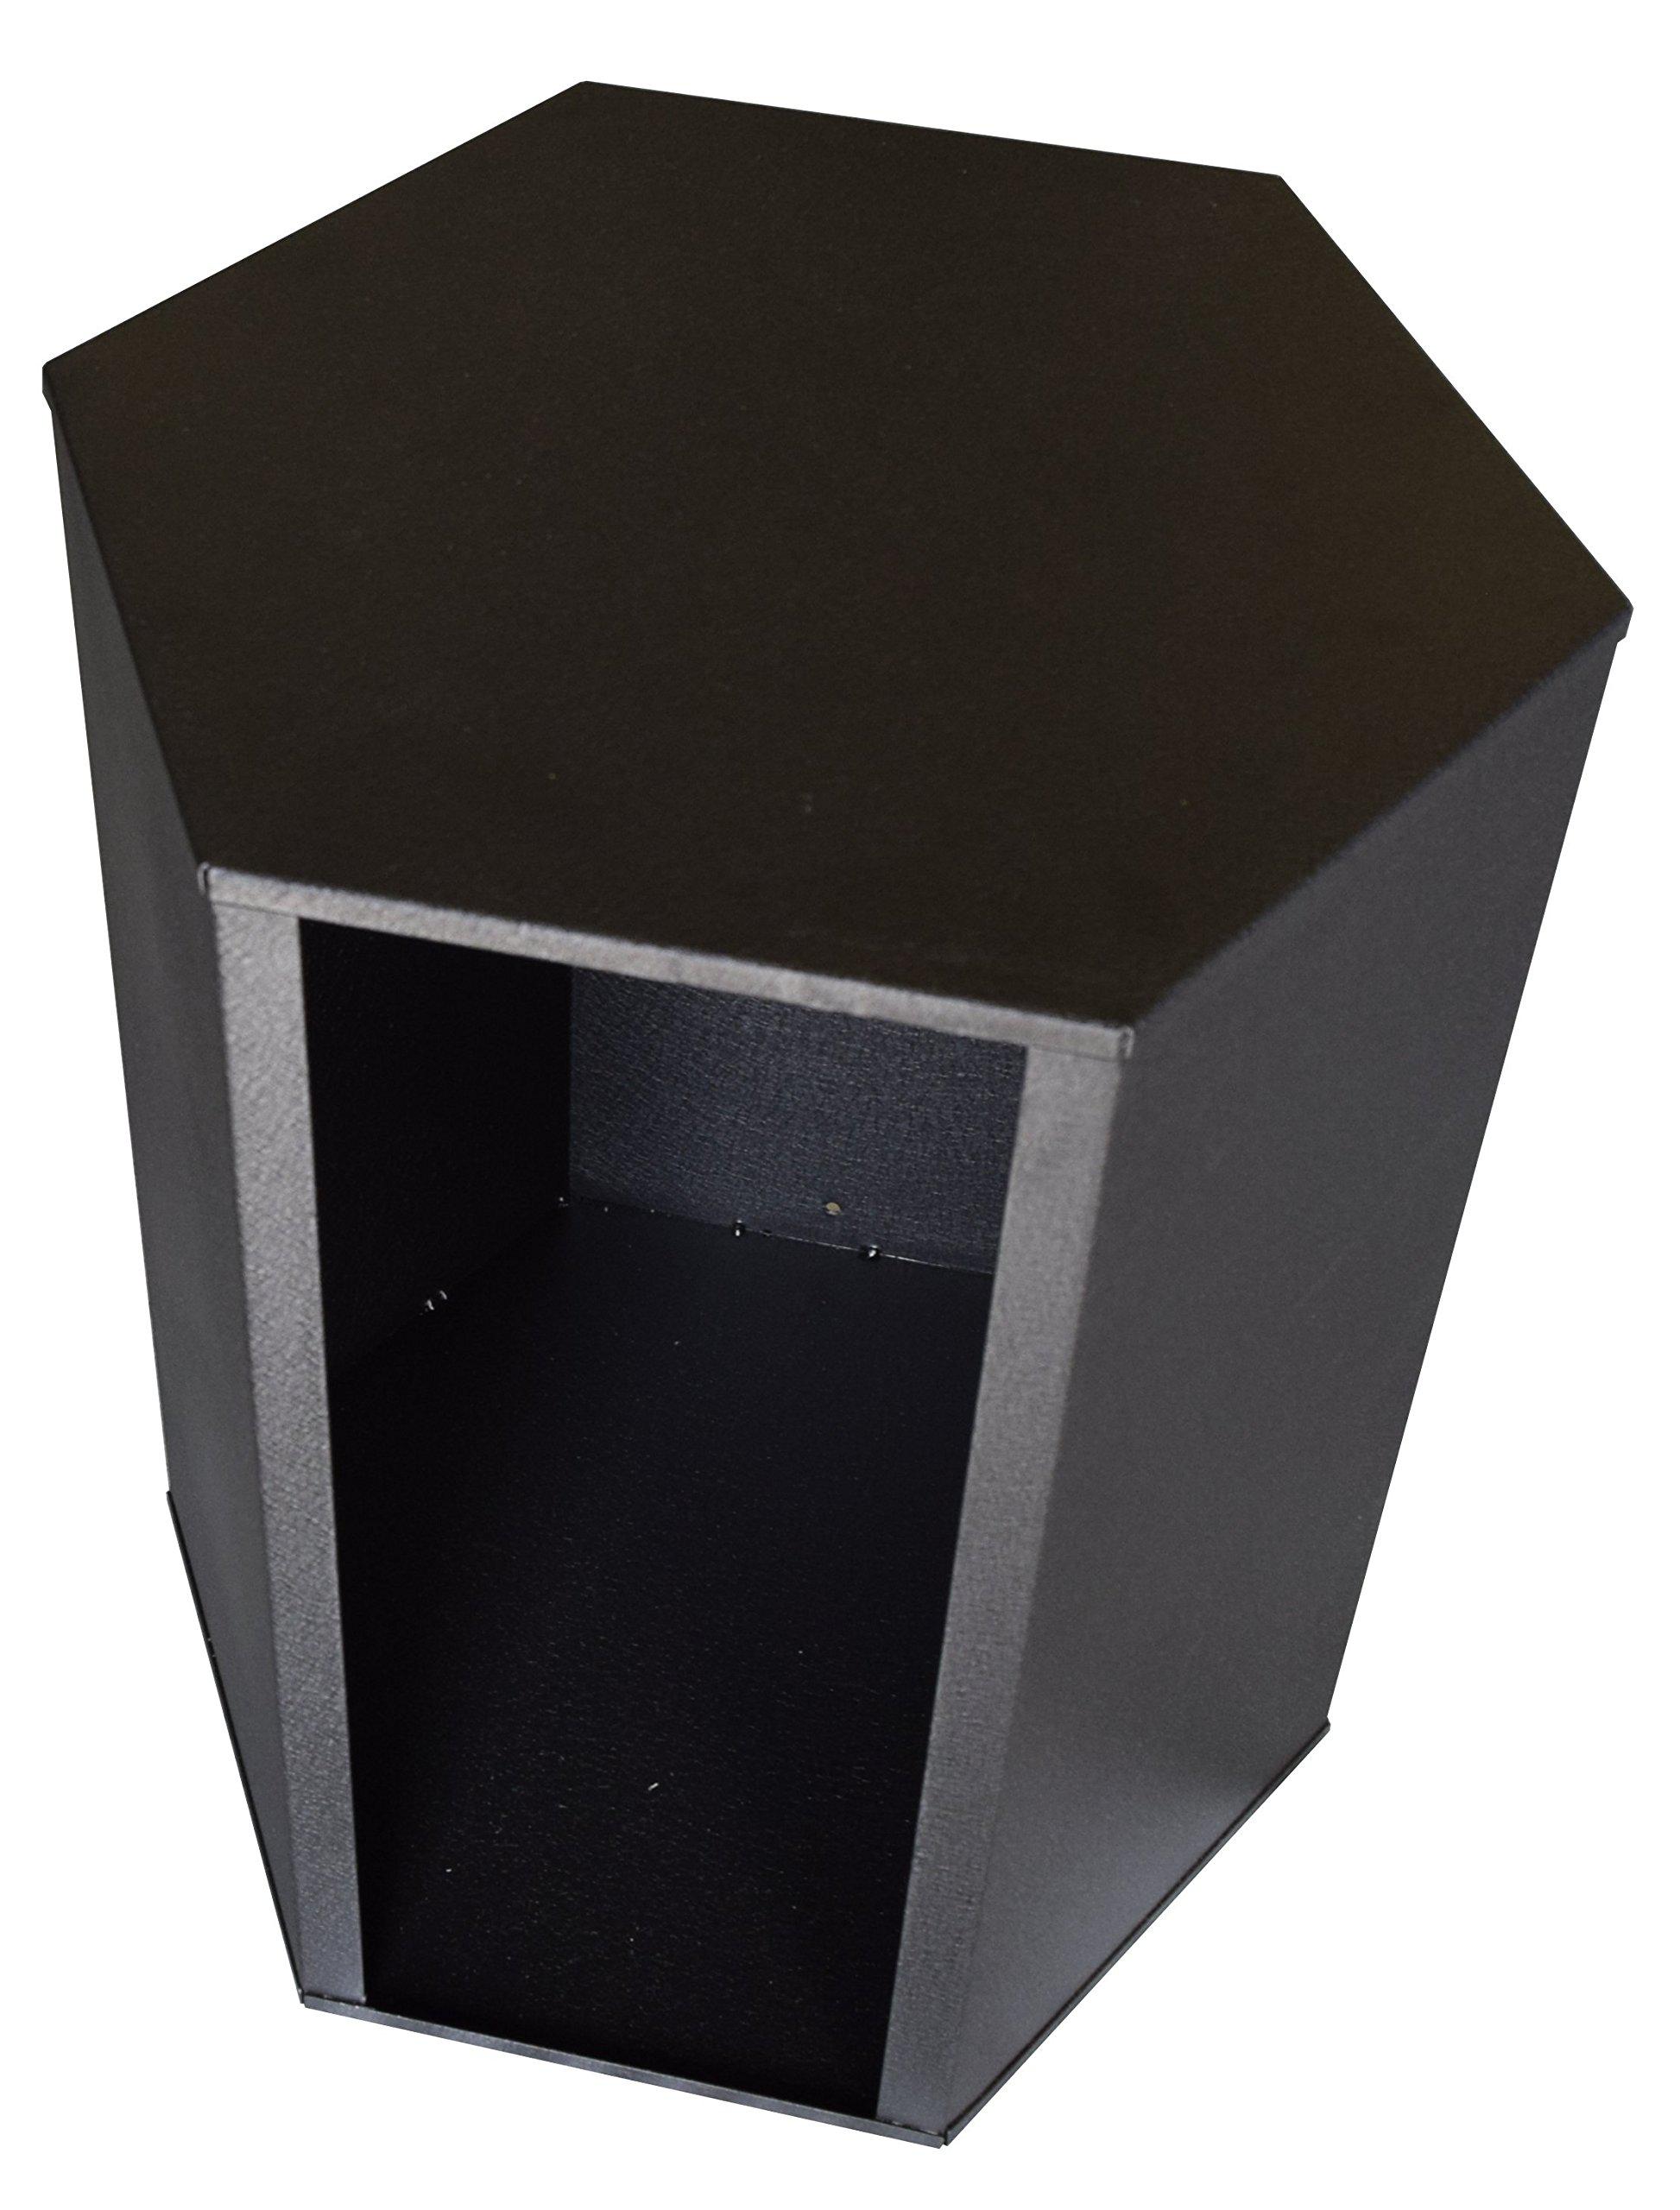 rmp pet nook nightstand end table, sturdy and unique - midnight black